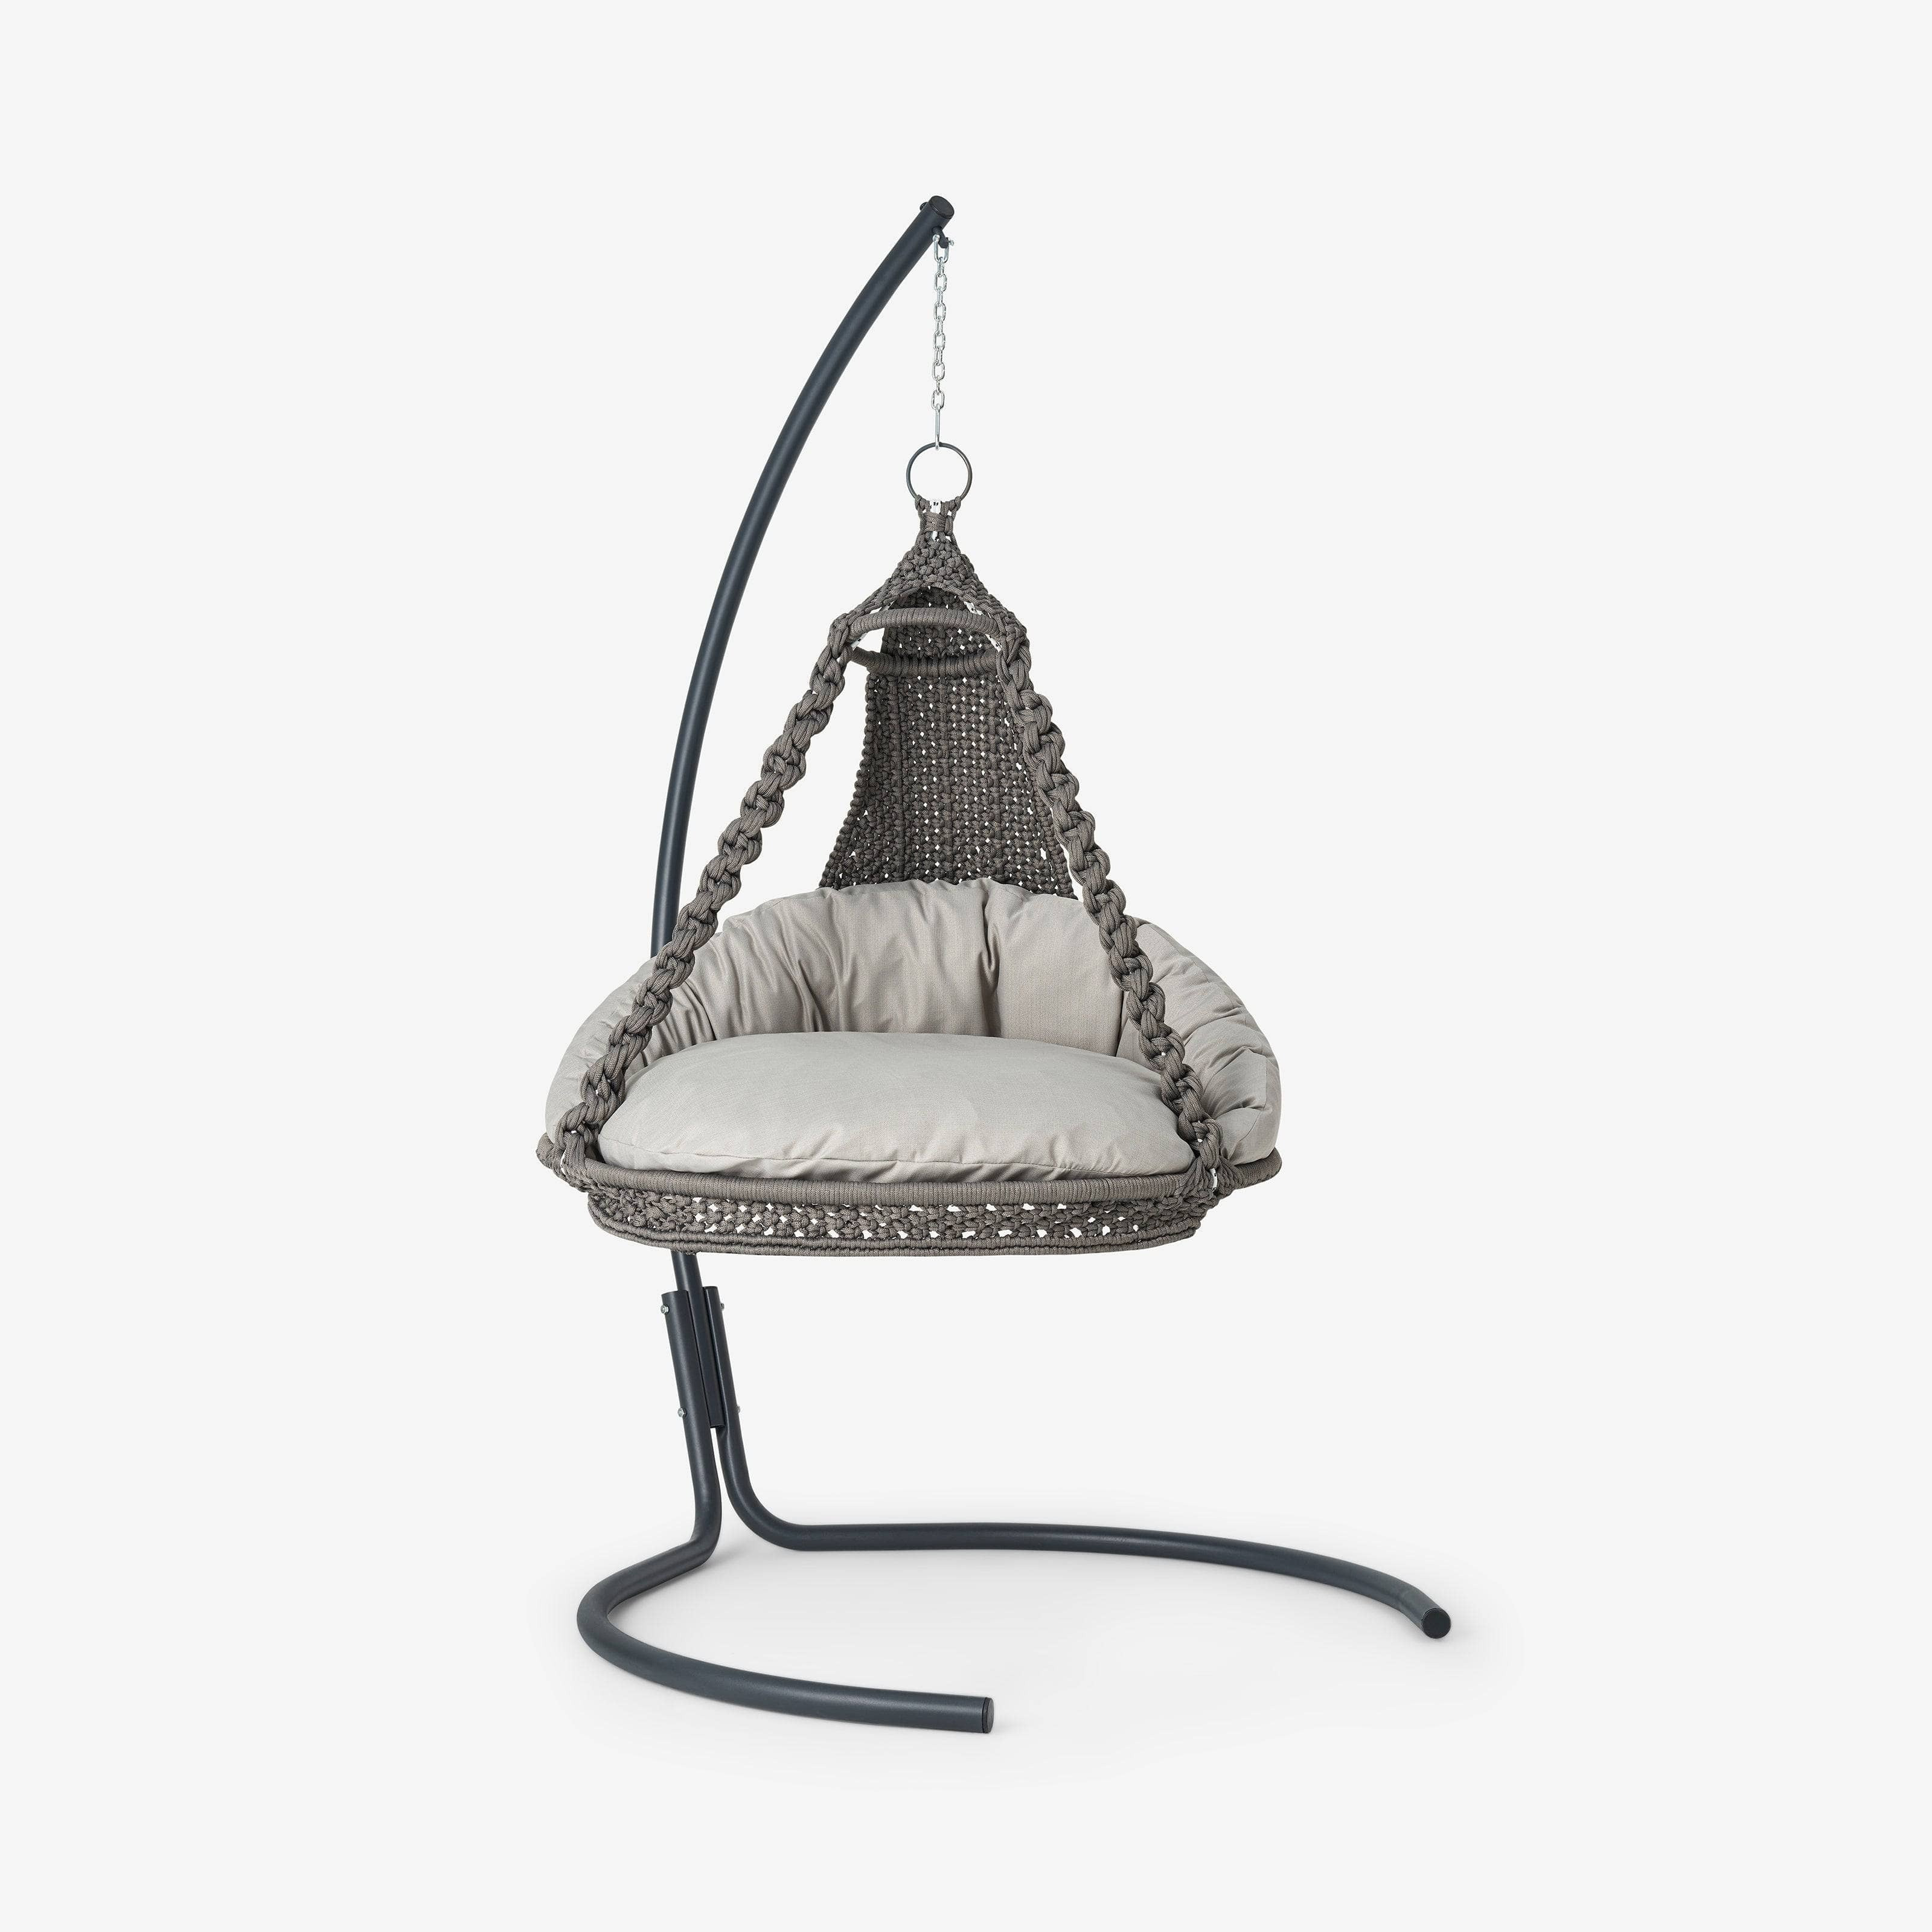 Arto Hand Woven Hanging Chair, Anthracite Grey